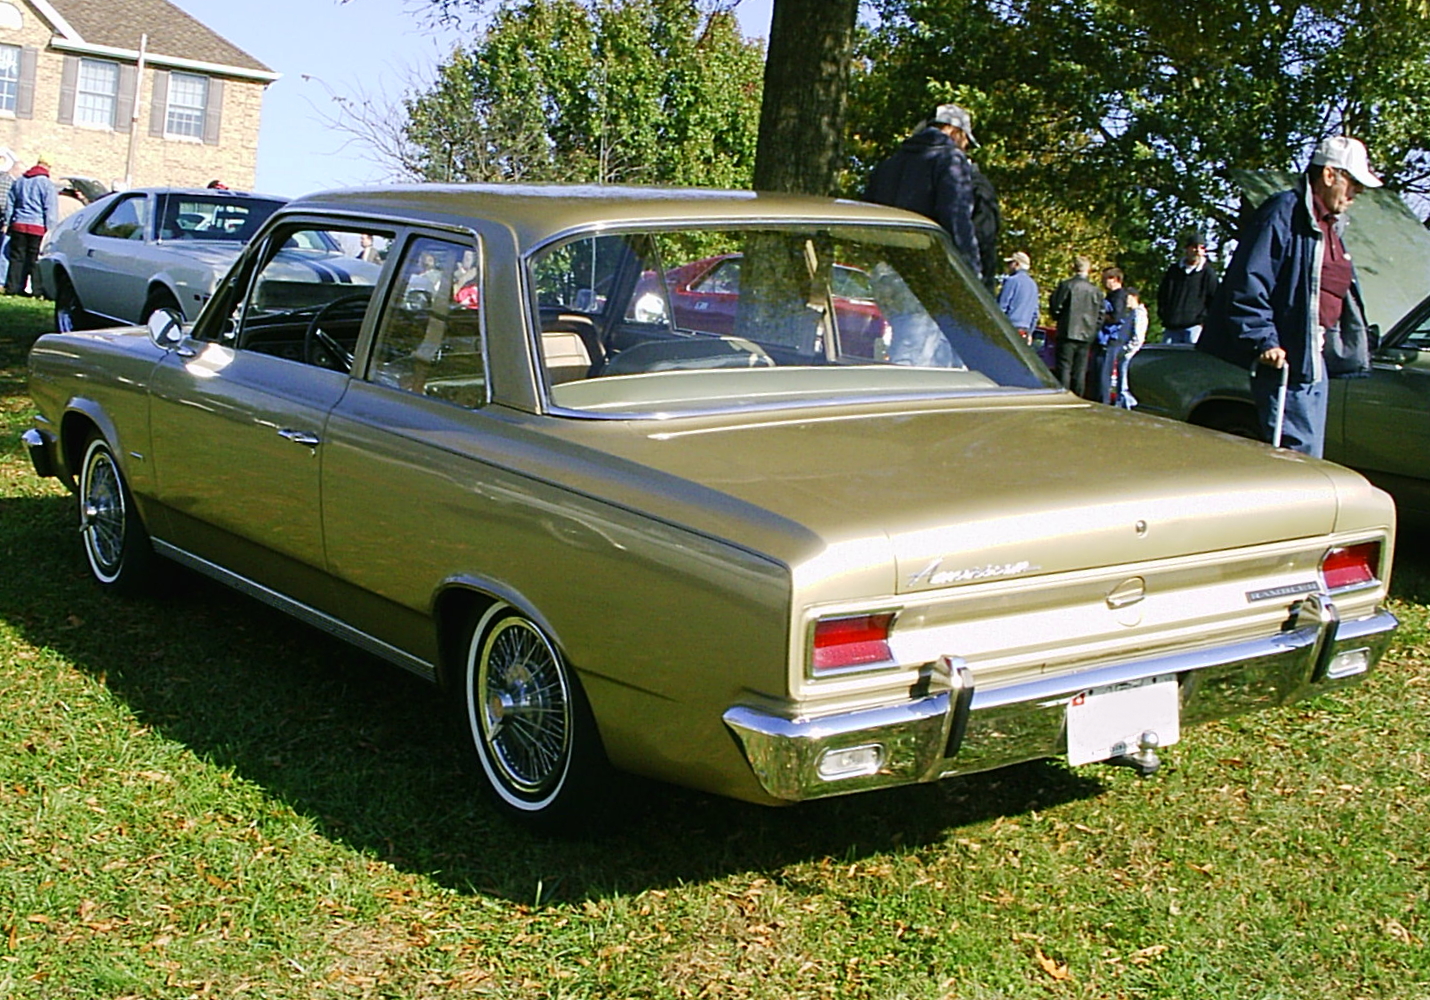 Rambler American De Luxe Photo Gallery: Photo #01 out of 11, Image ...